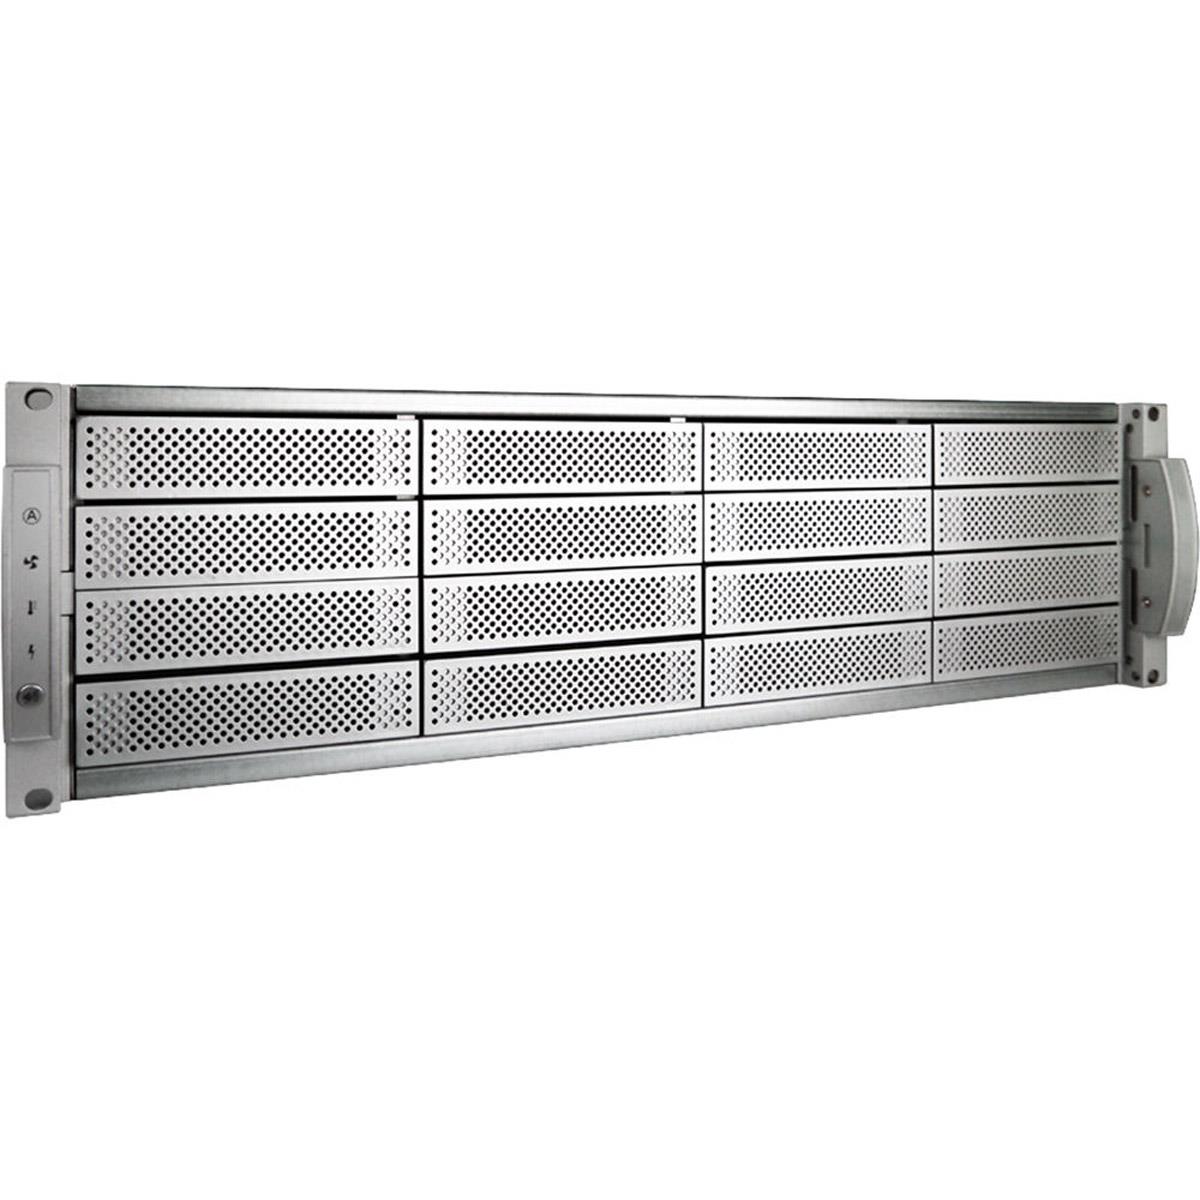 Image of Accusys T-Share A16T3-SHARE 16-Bay Thunderbolt RAID System